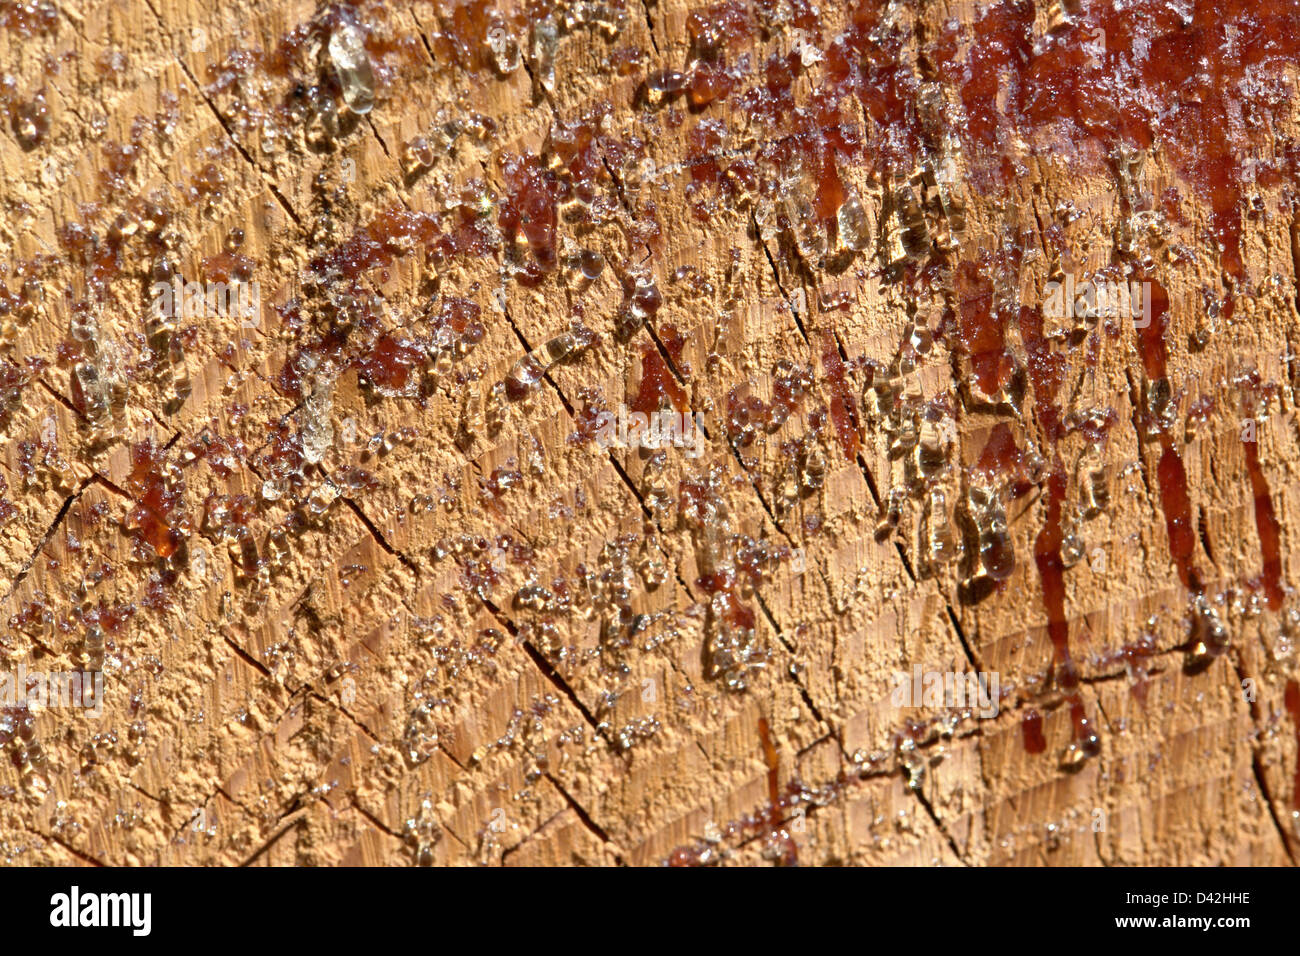 abstract background with resin drops on wooden surface Stock Photo